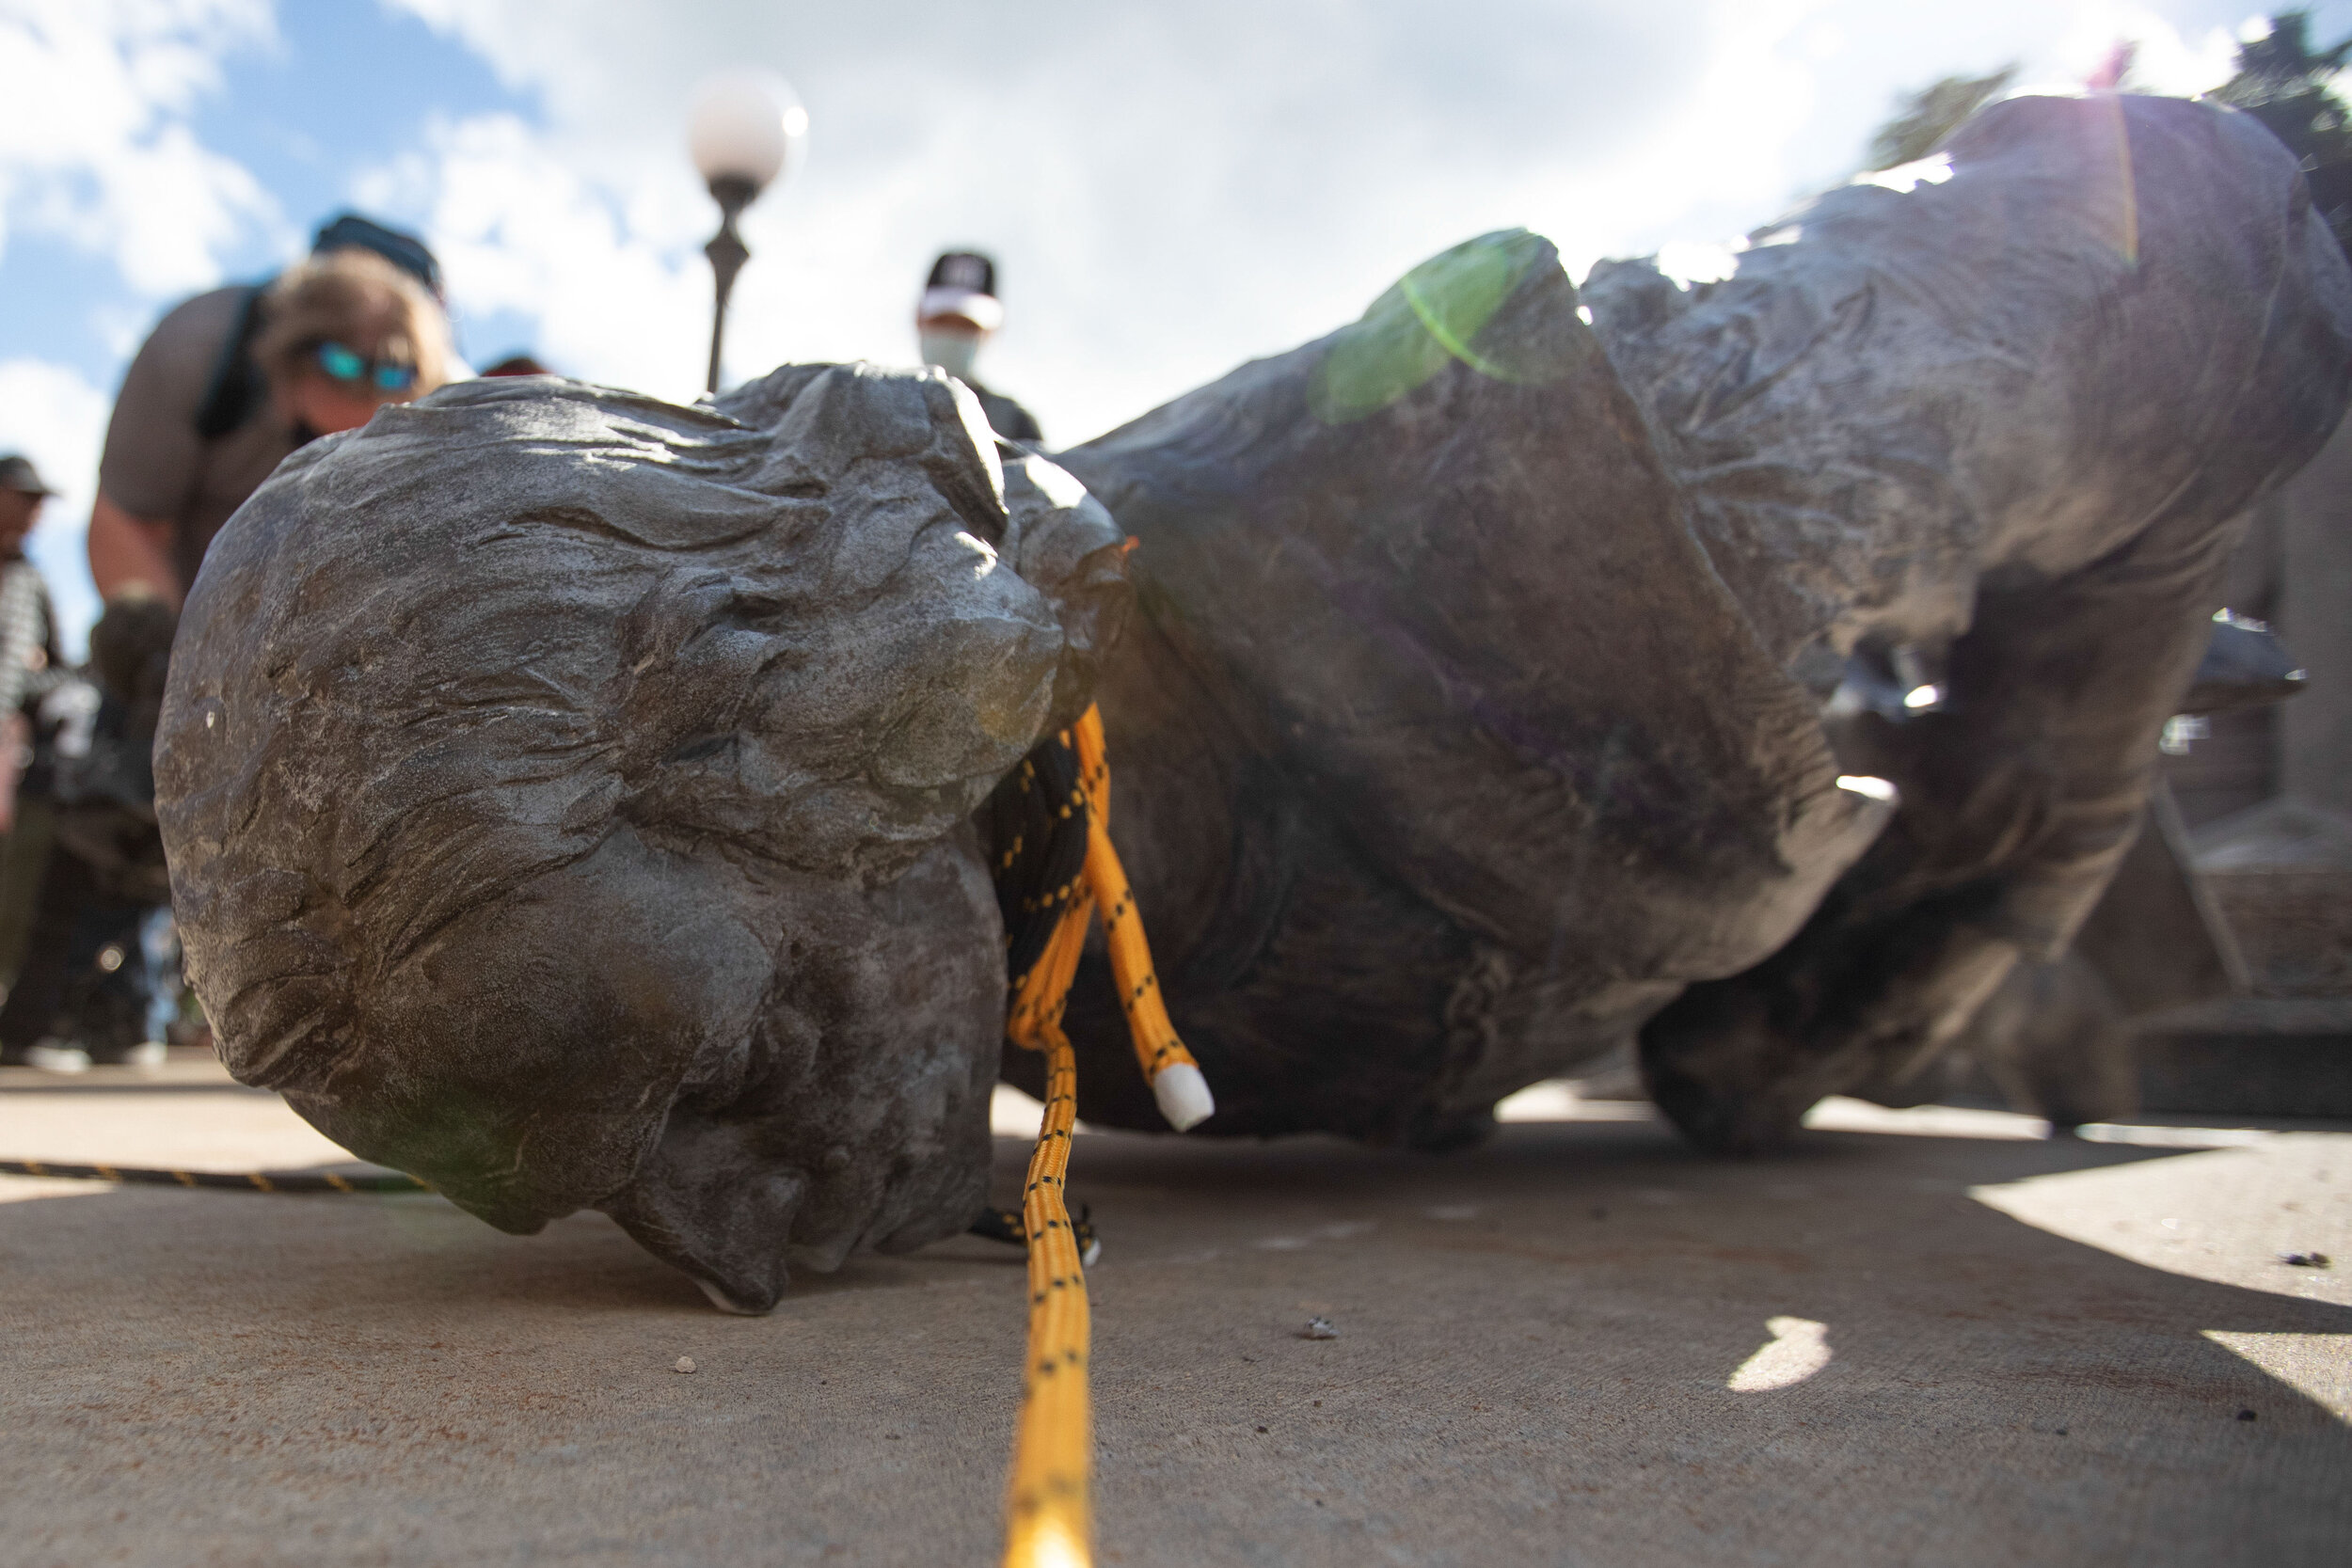  With the rops till wrapped around its neck, the statue of Christopher Columbus at the State Capitol in Saint Paul, Minnesota lays face down on Jun 10, 2020. 